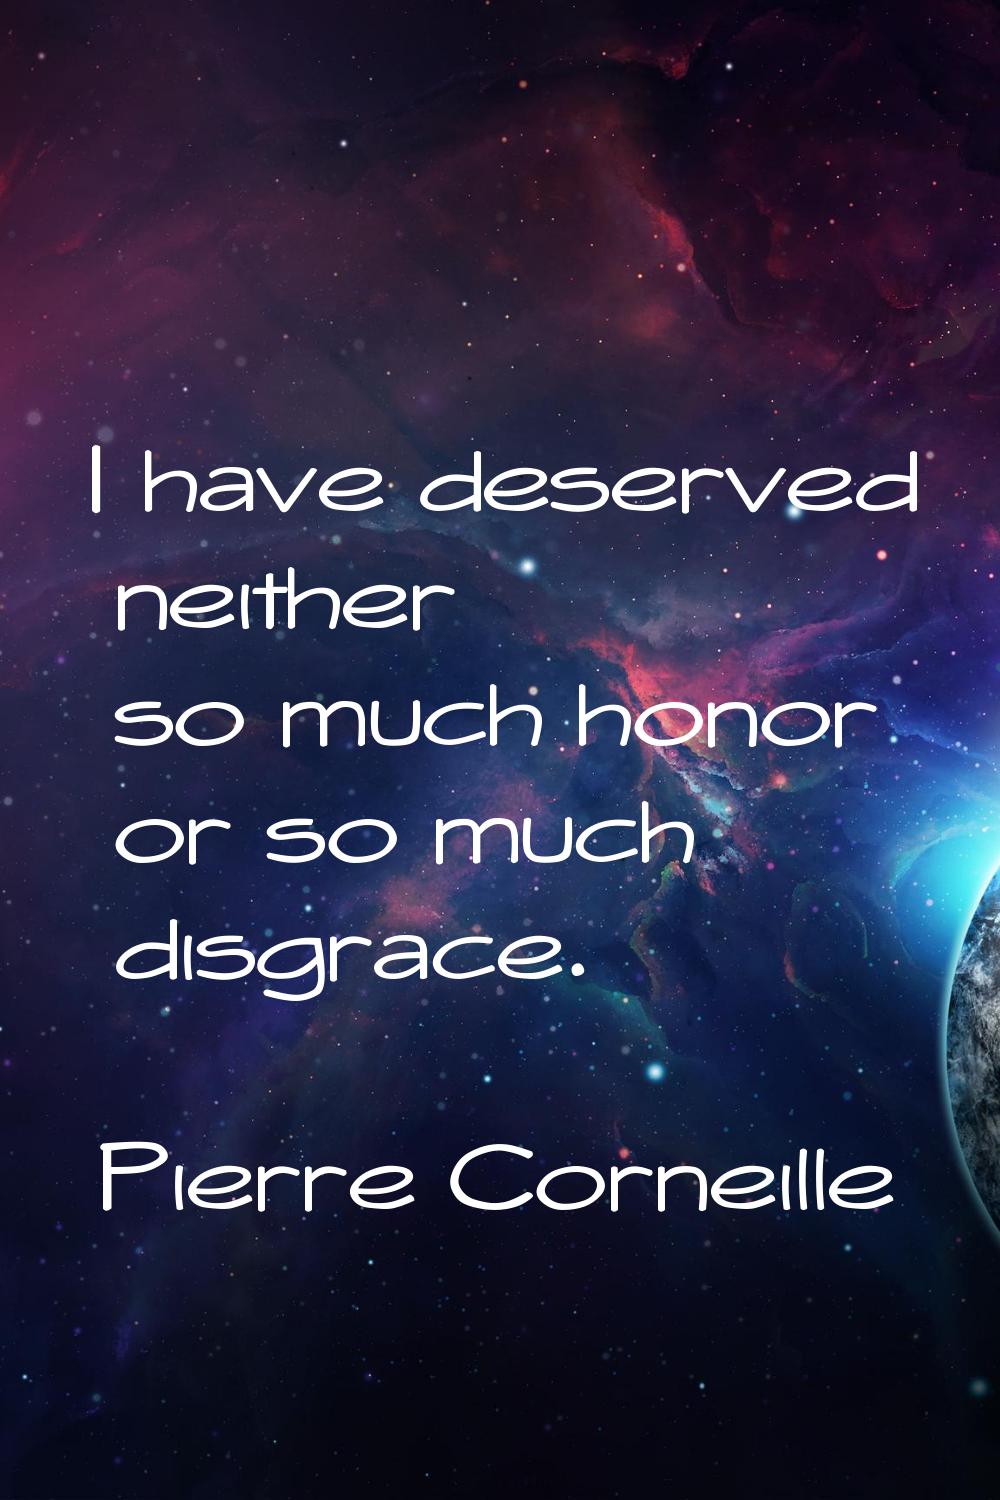 I have deserved neither so much honor or so much disgrace.